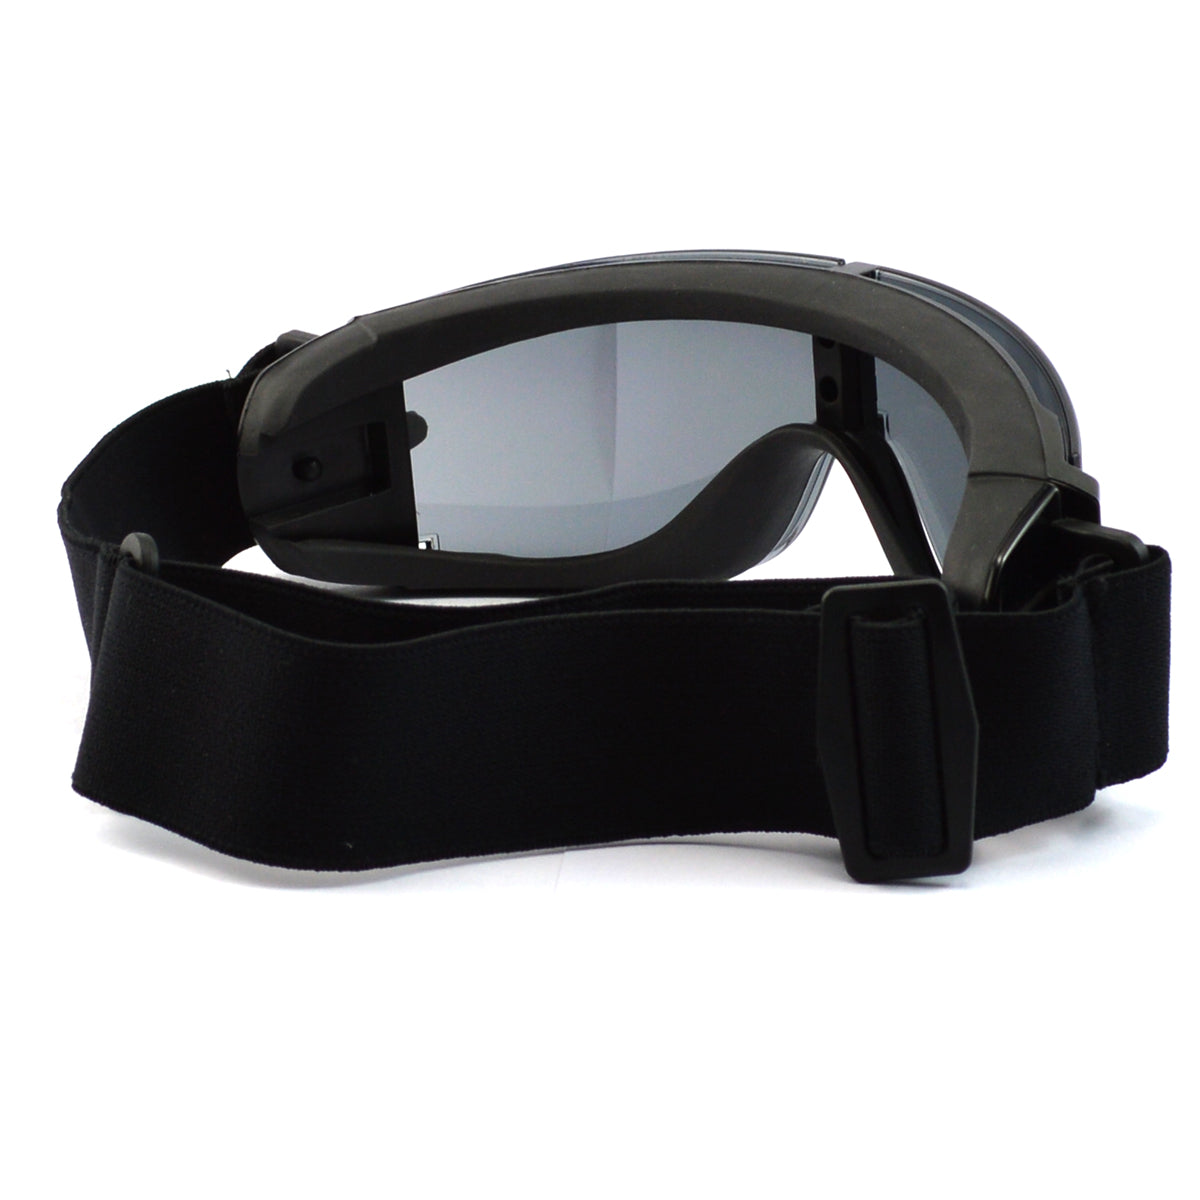 Unisex Semi-Goggle Style with Interchangeable Color Lense Cycling Sunglasses